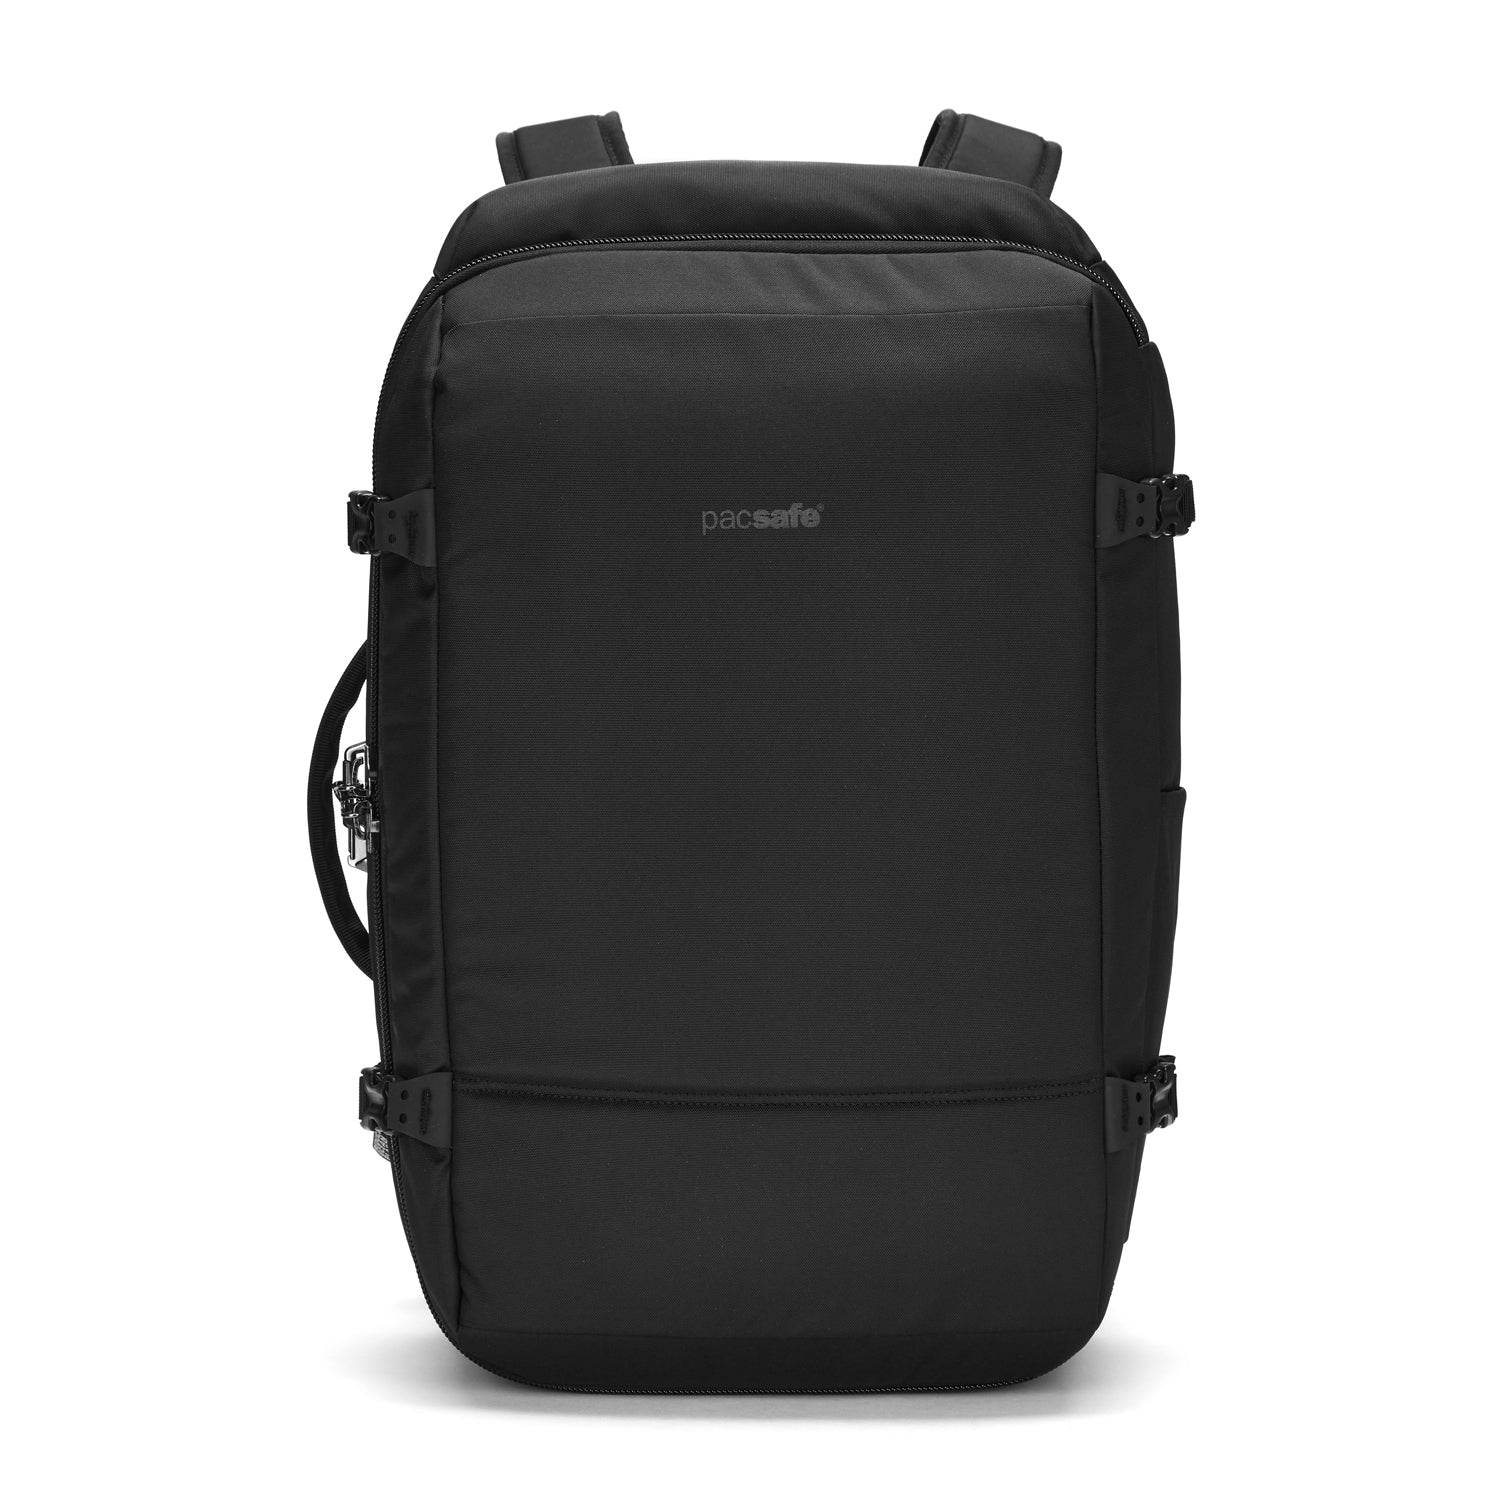 Pacsafe Official  Shop Online For Anti-Theft Backpacks & Travel Gear